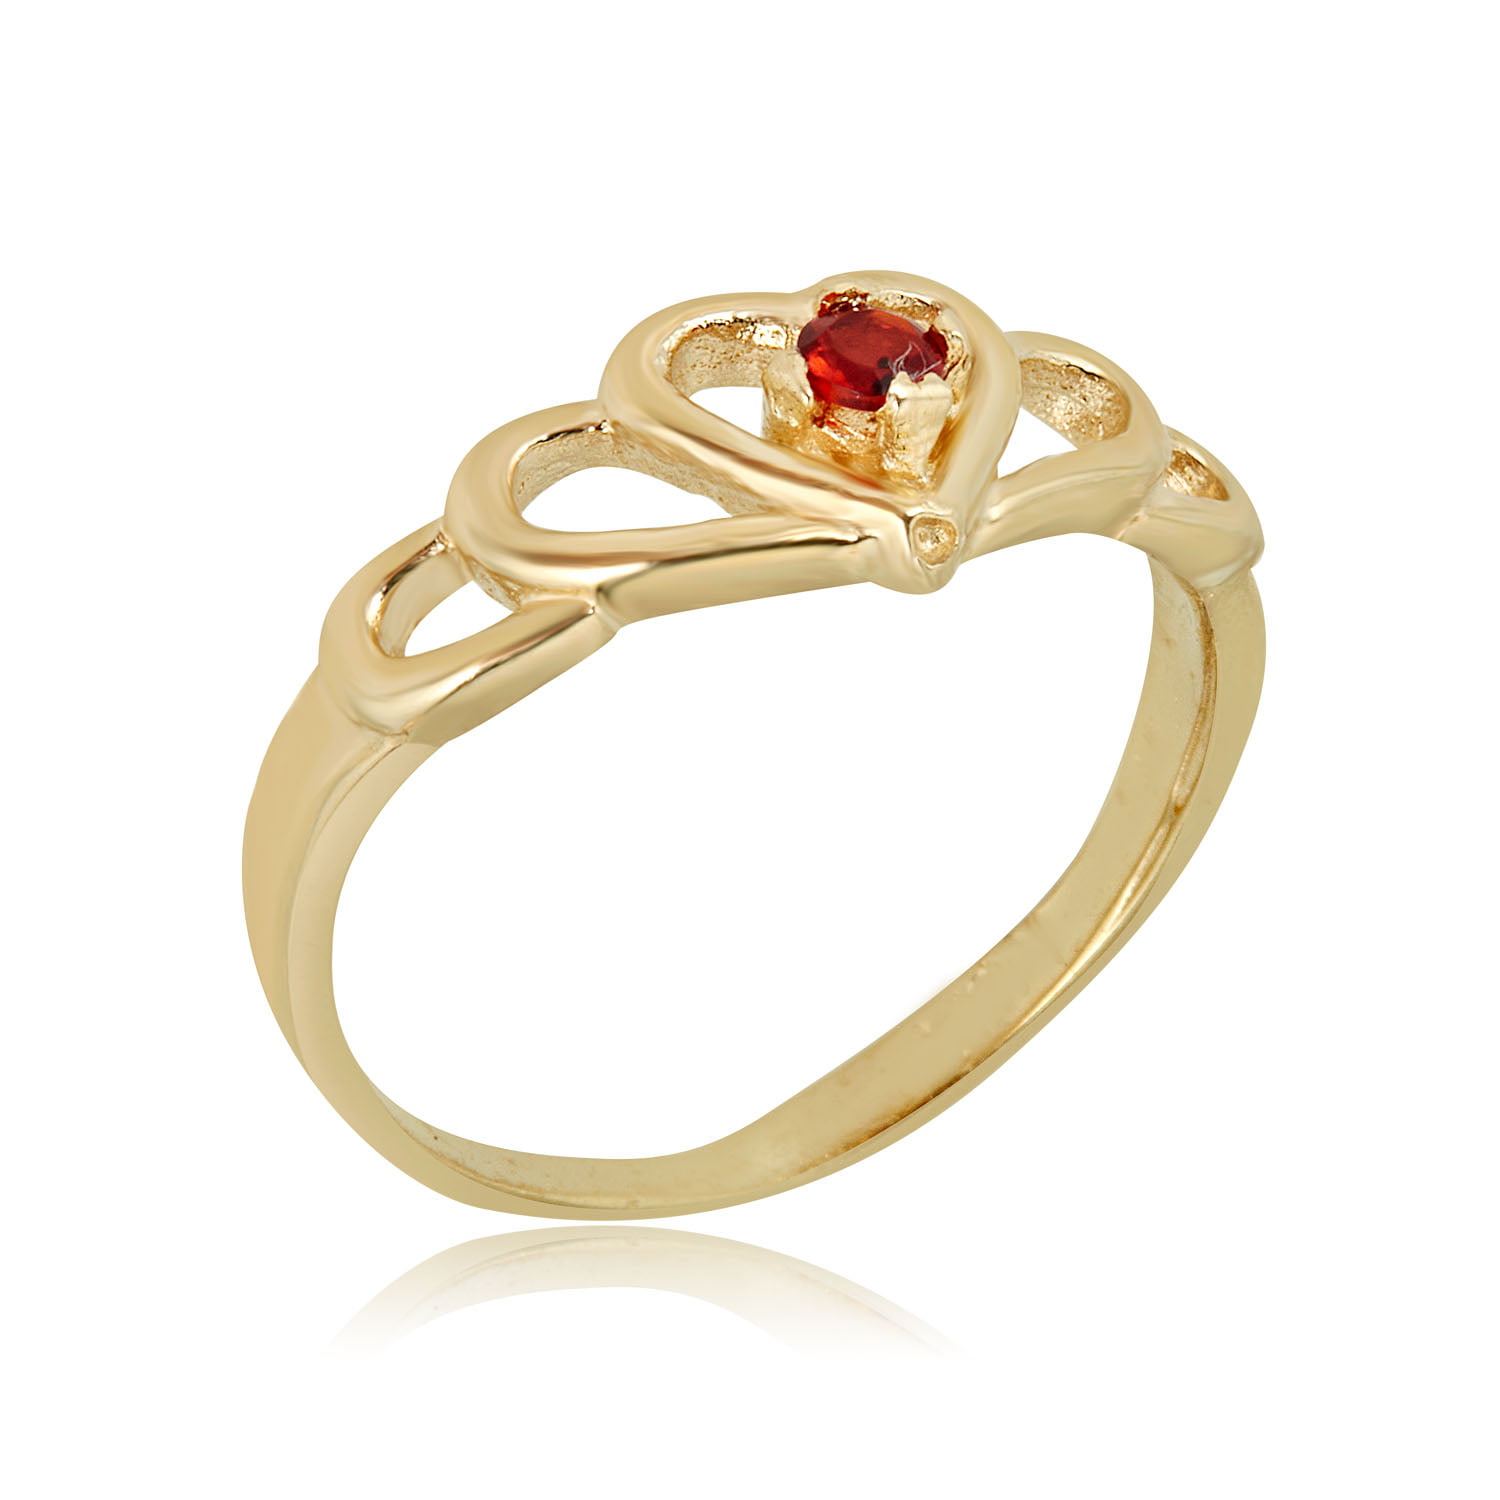 Real Garnet Gold Plated Ring For Women Round Shape Astrological January Birthstone 5,6,7,8,9,10,11,12 